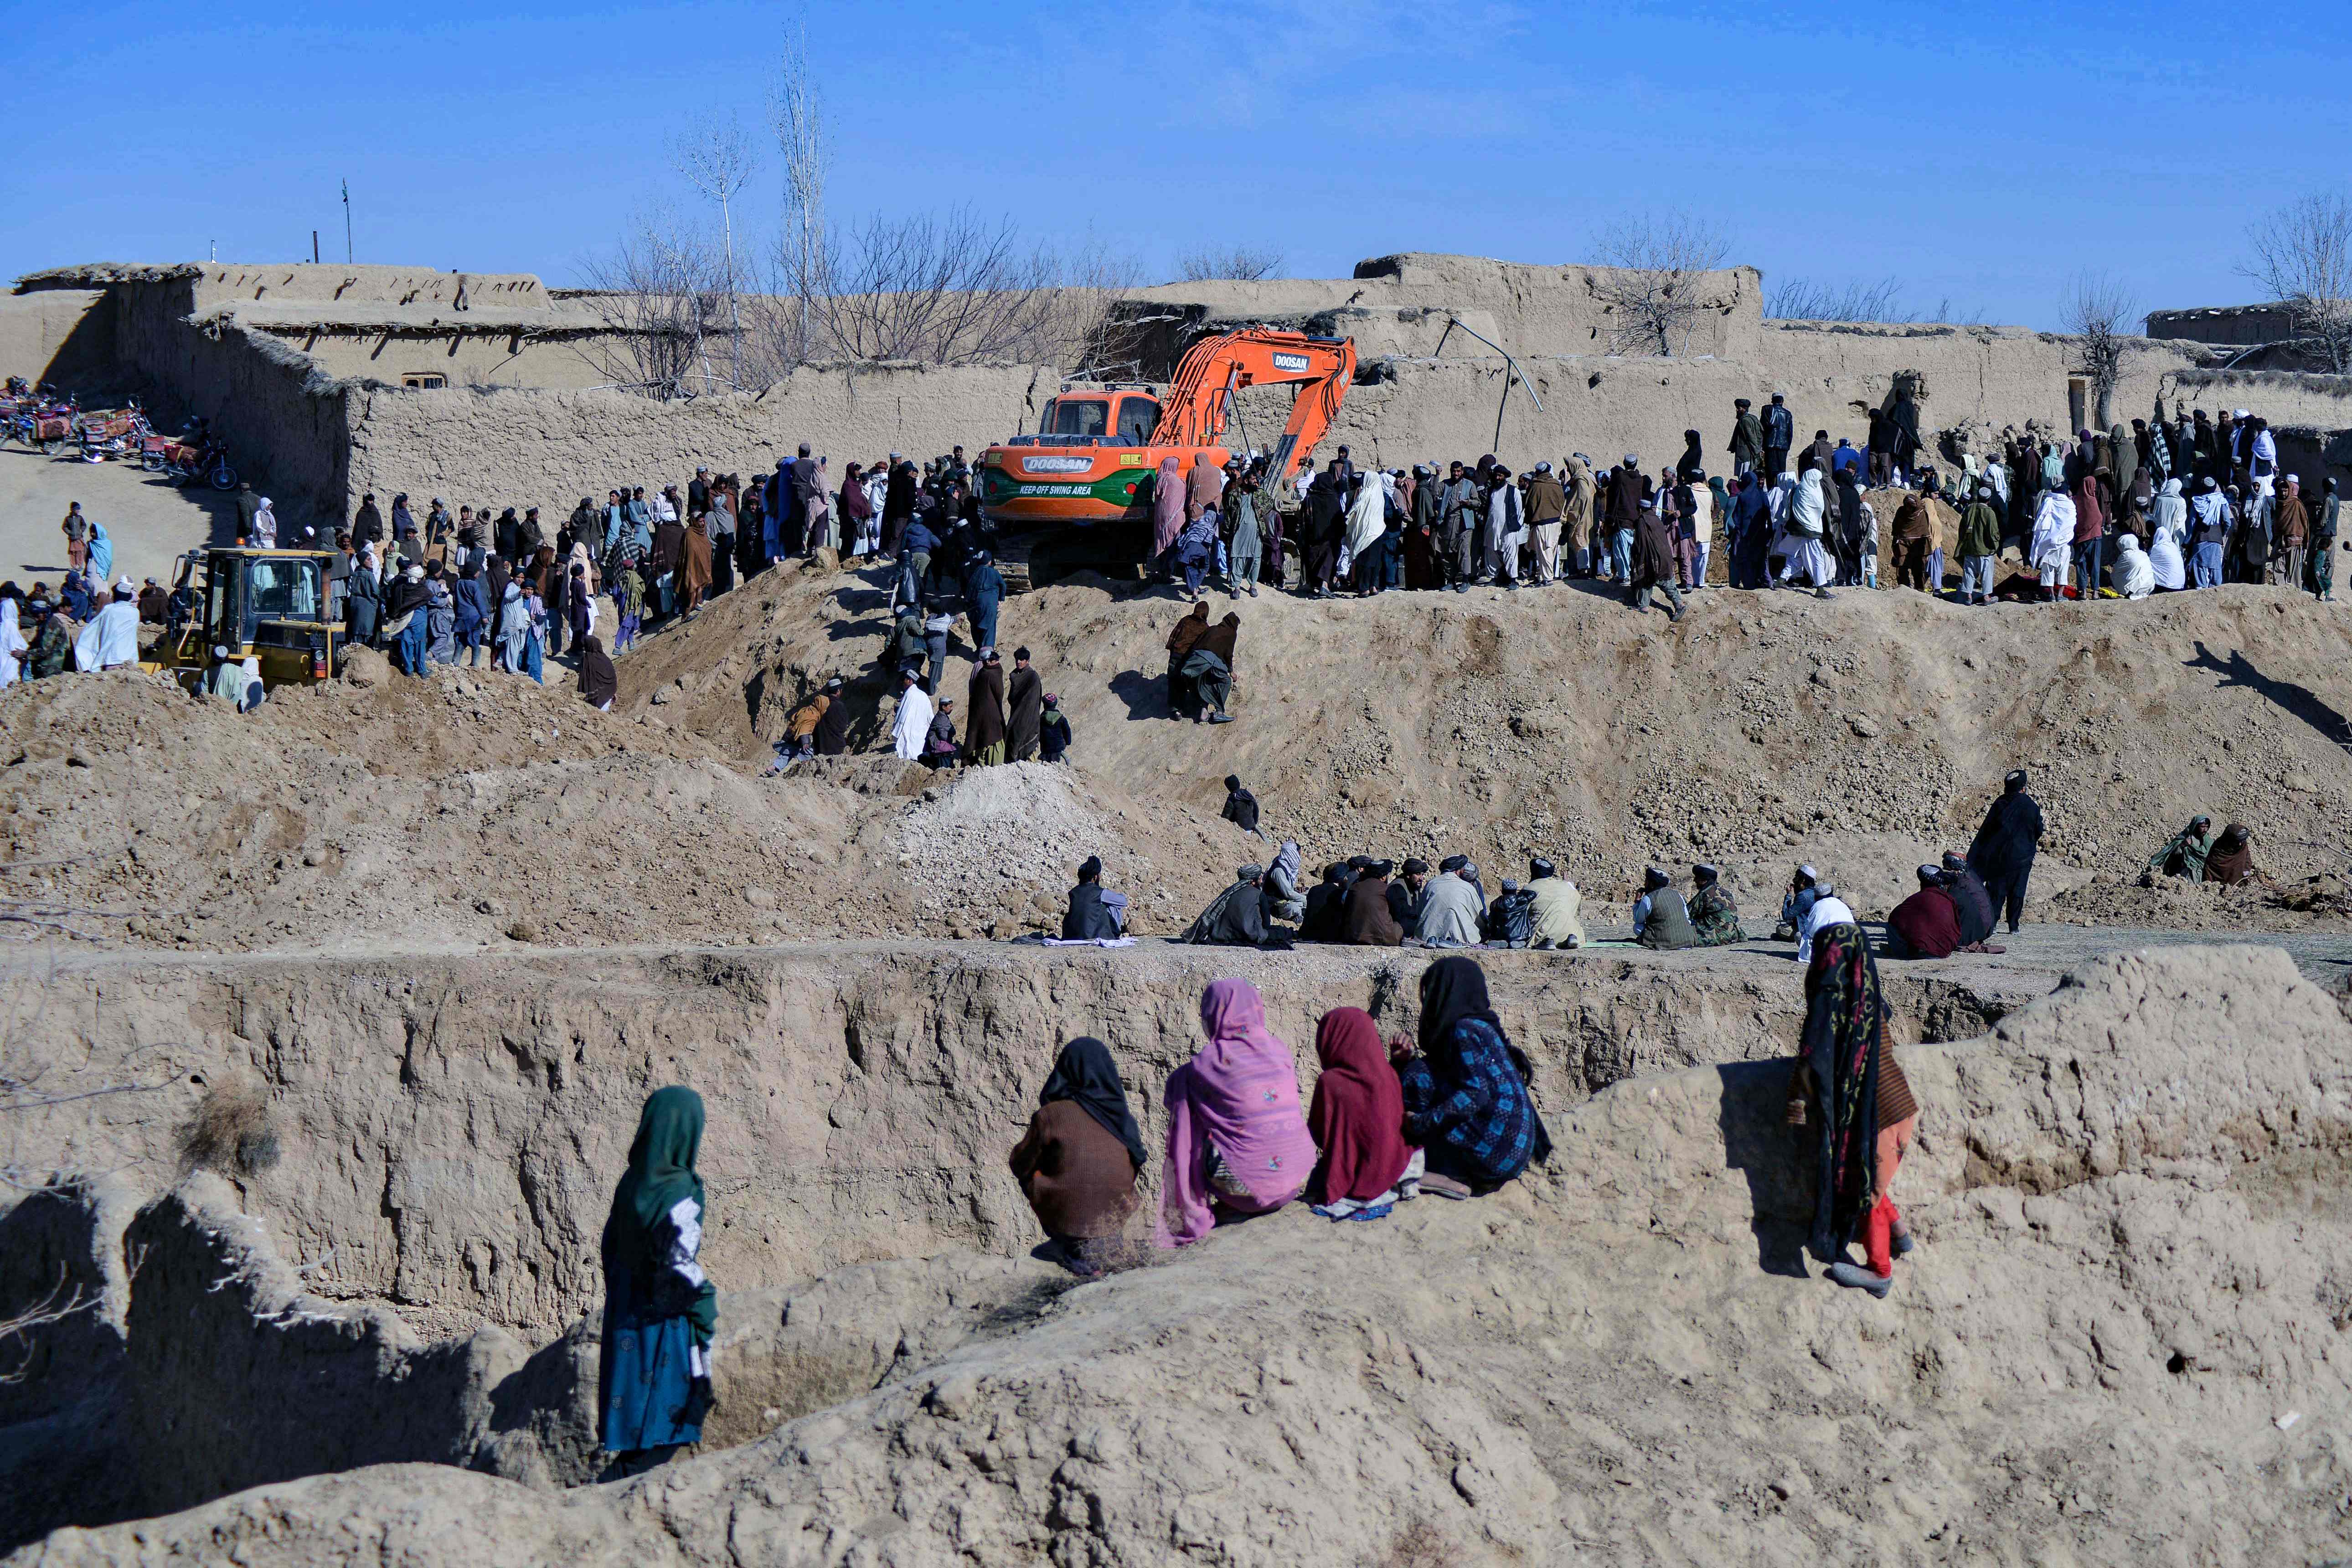 Afghans gather as rescuers try to reach and rescue a boy trapped for days in a well in the remote village of Shokak